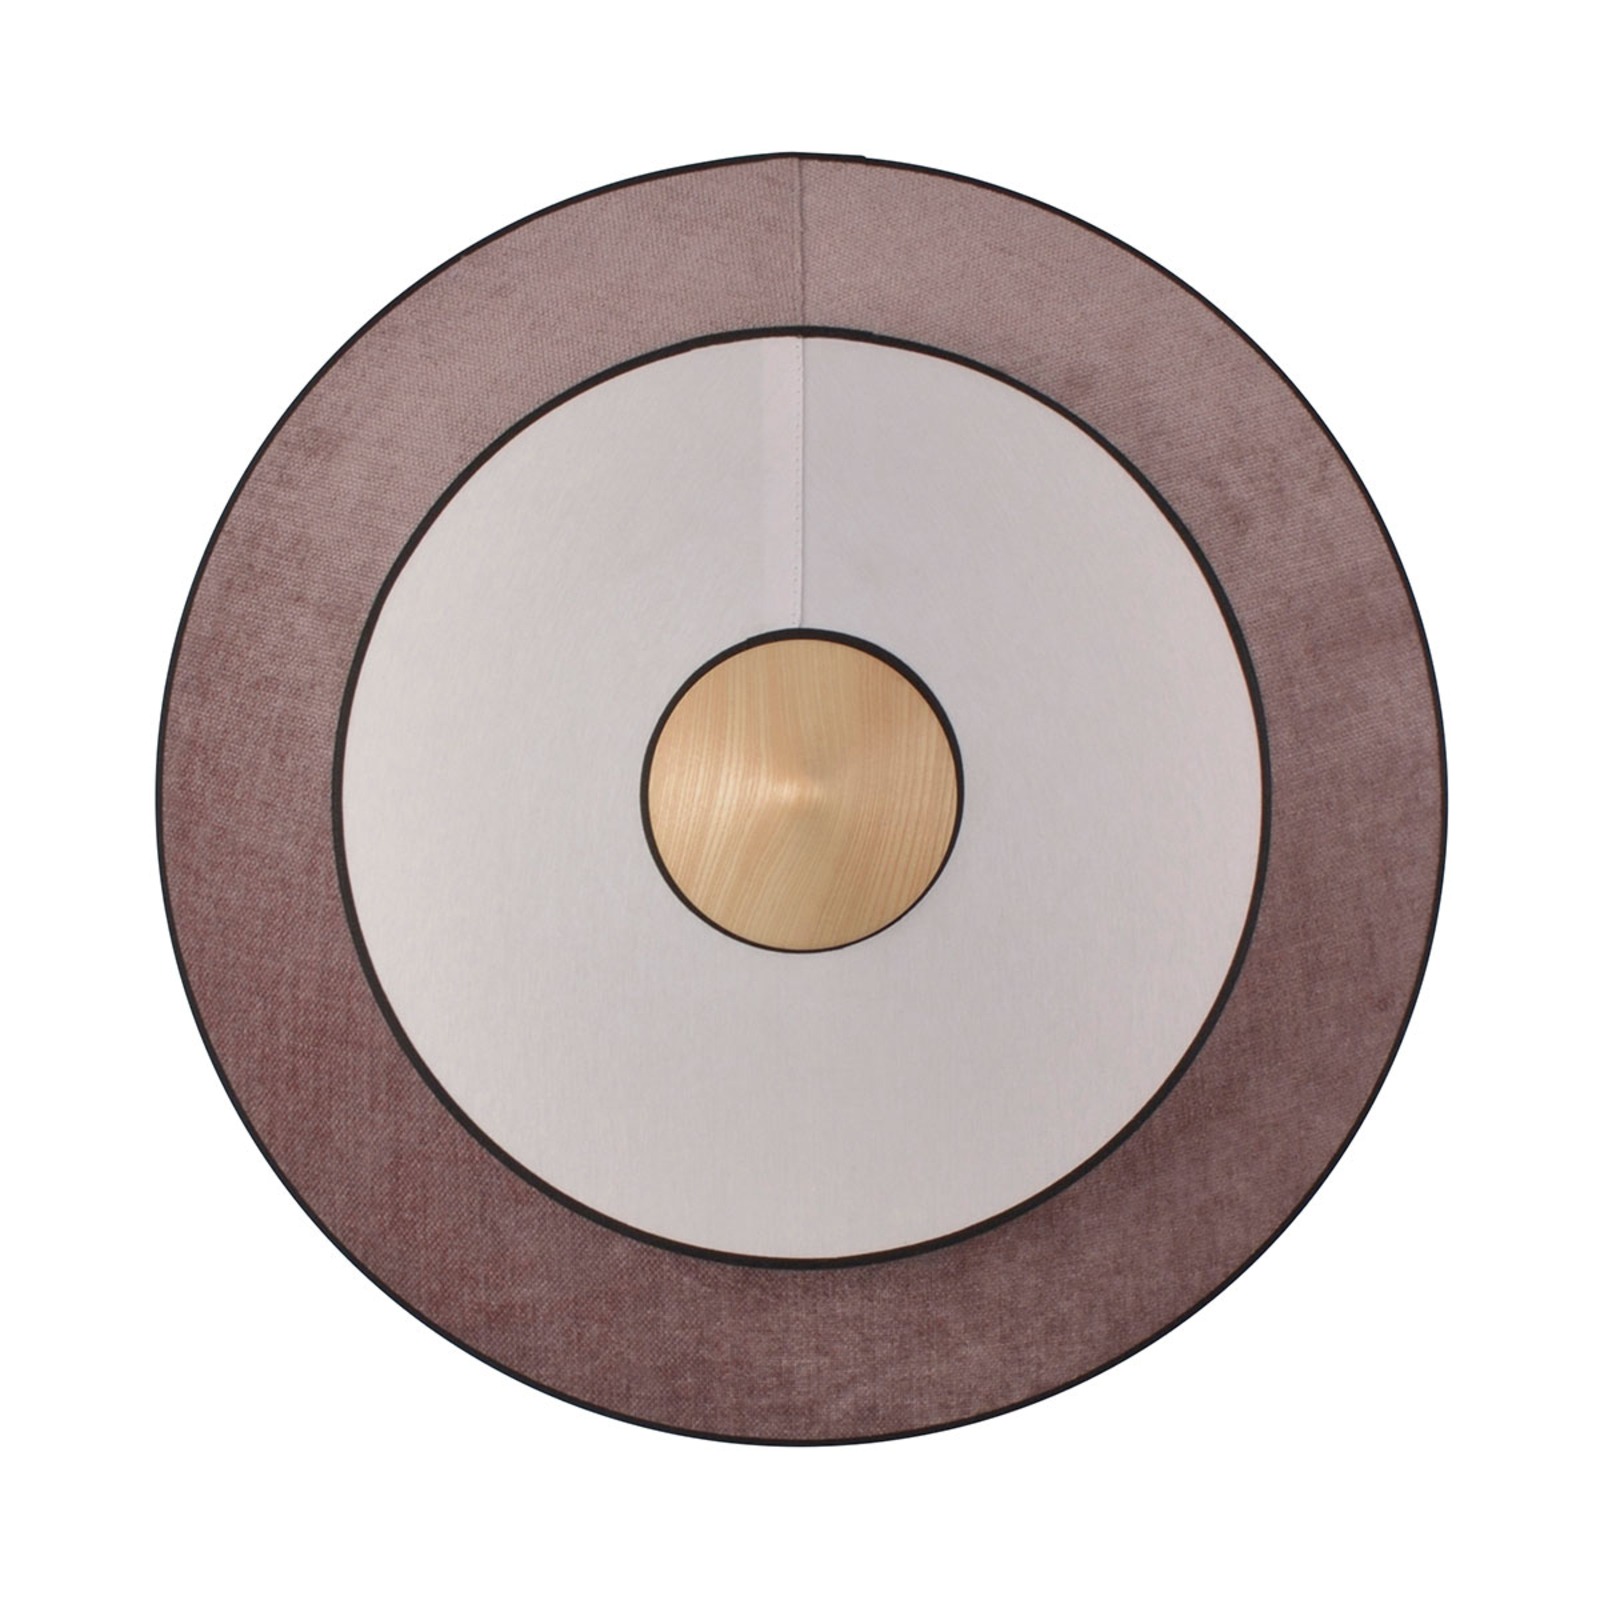 Forestier Cymbal S LED-Wandleuchte, puderrosa